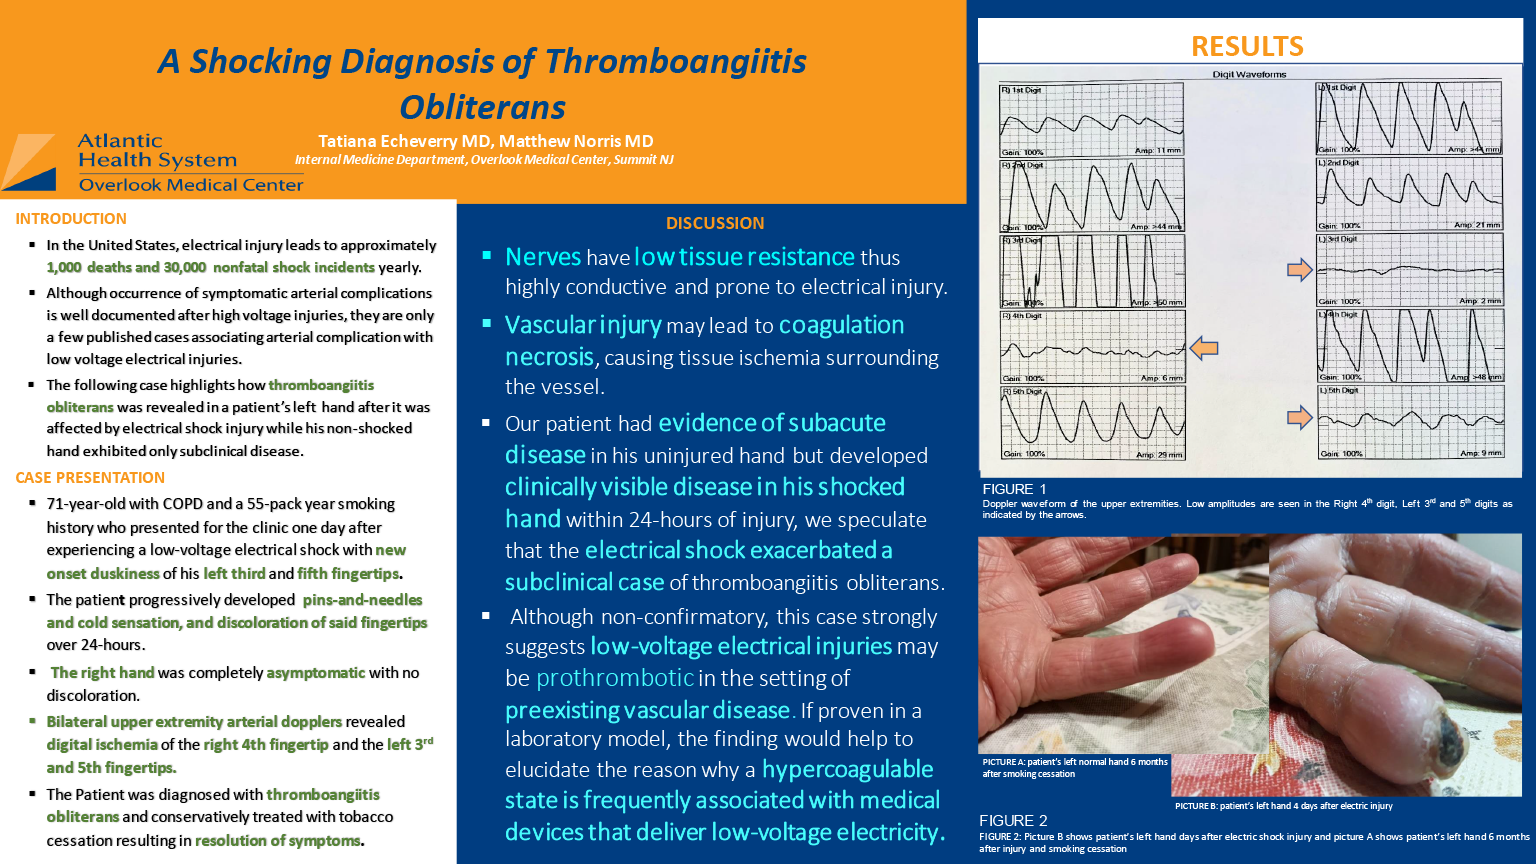 18-CV-38-AA Shocking Diagnosis of Thromboangiitis Obliterans after Electrical Injury